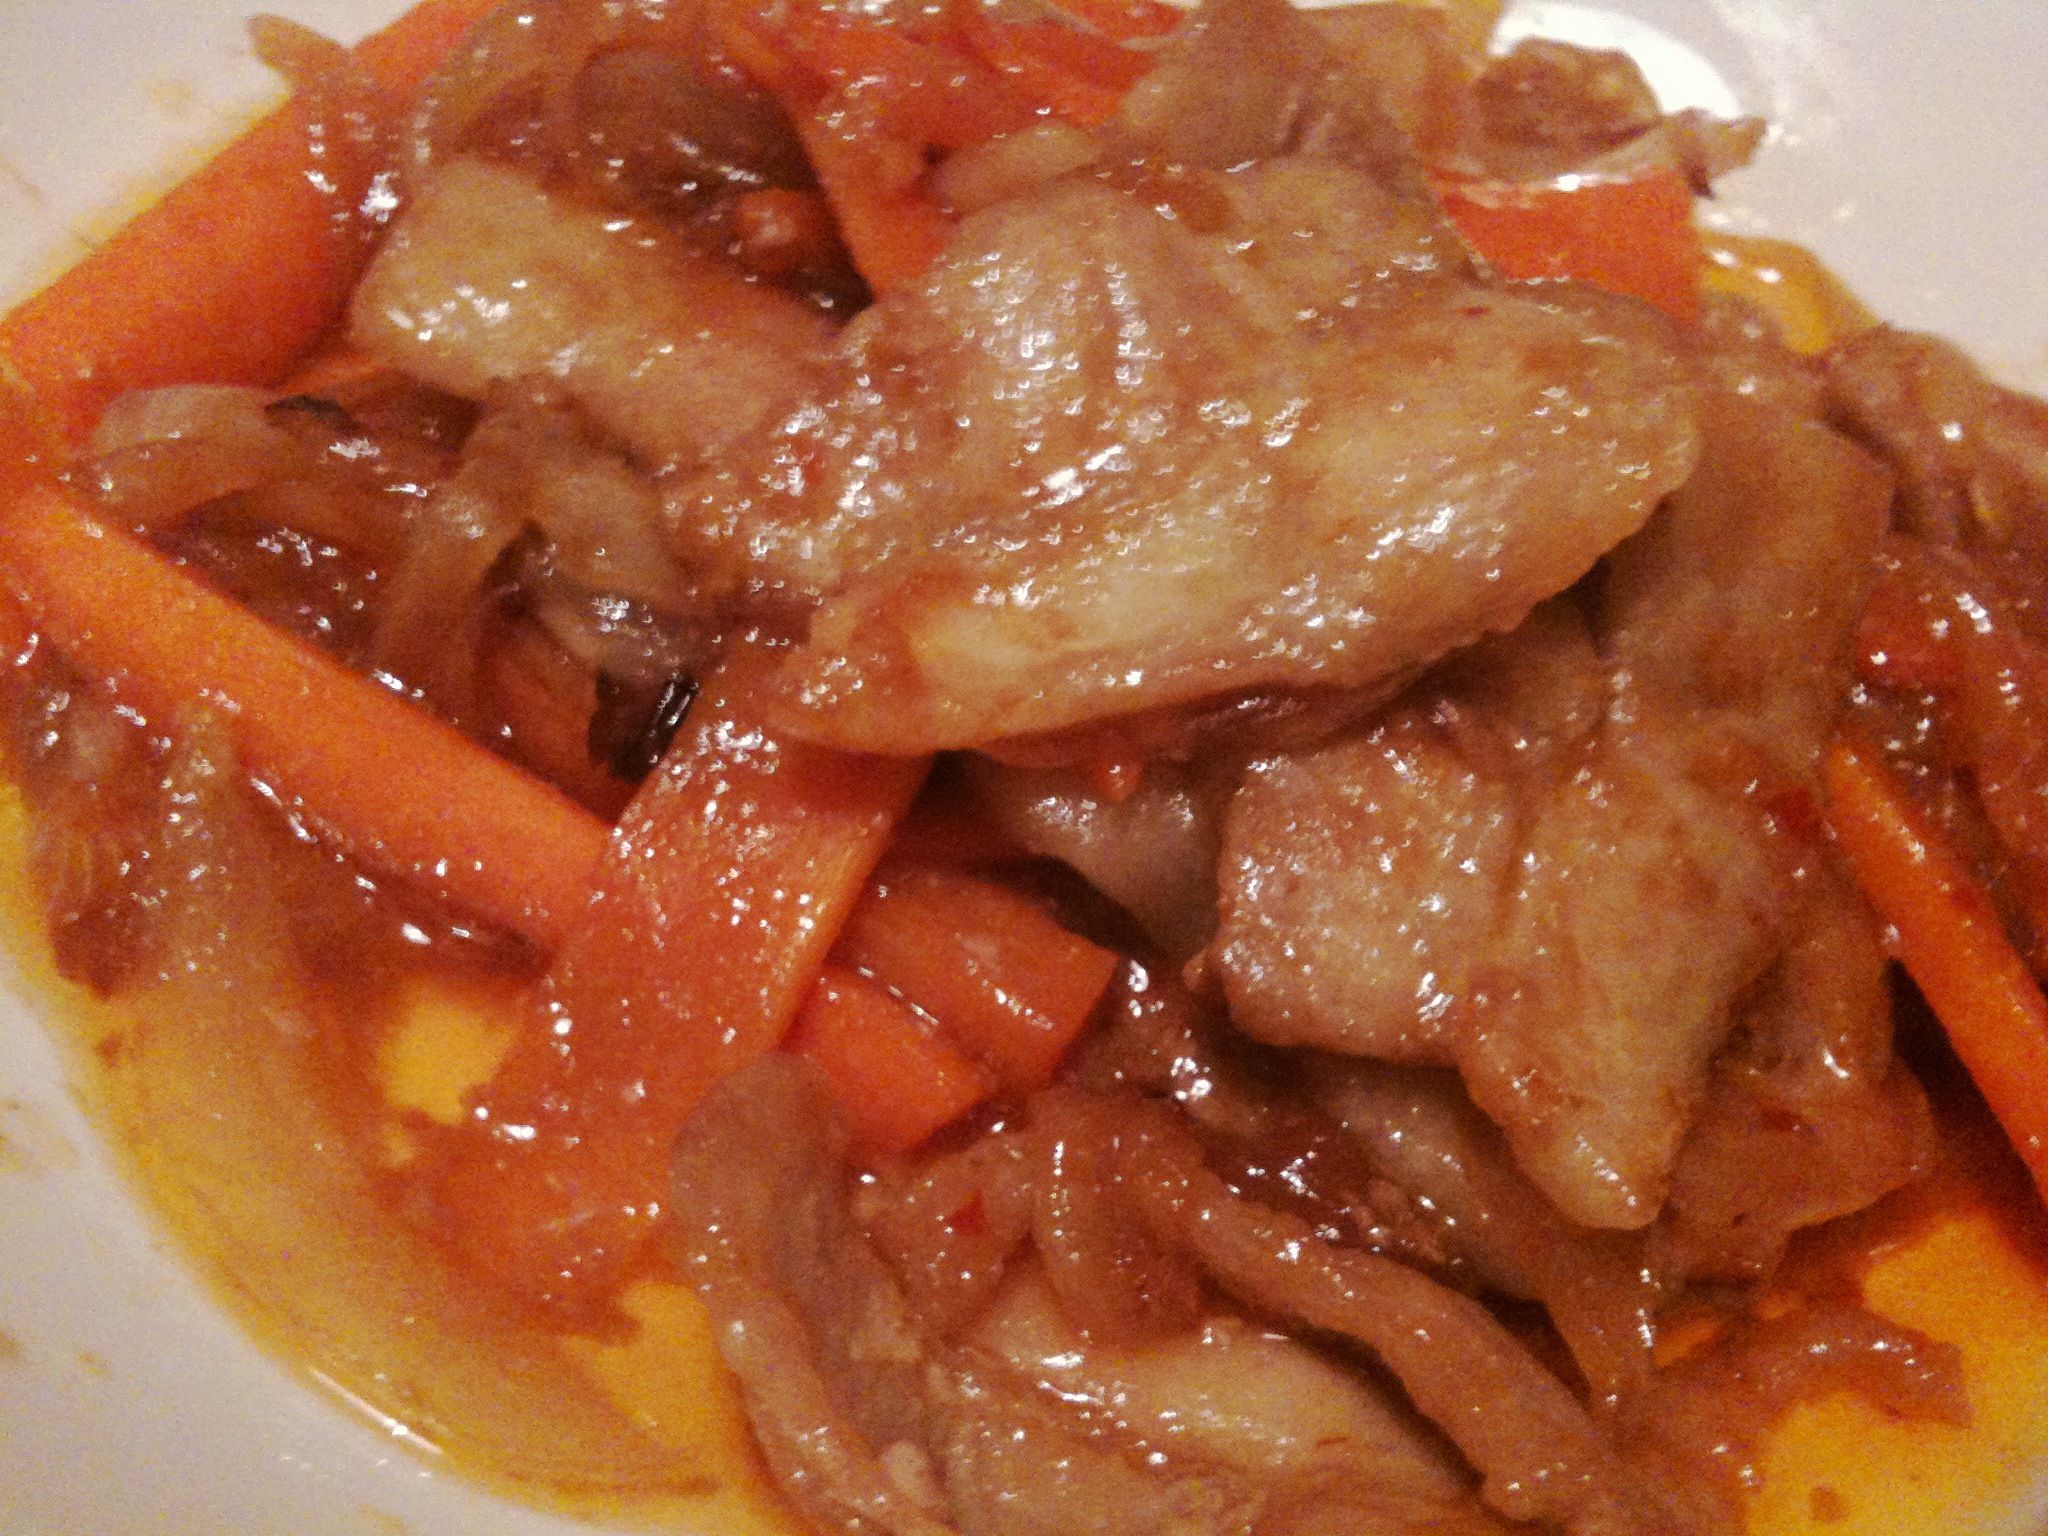 a meal of meat, carrots and gravy on a plate